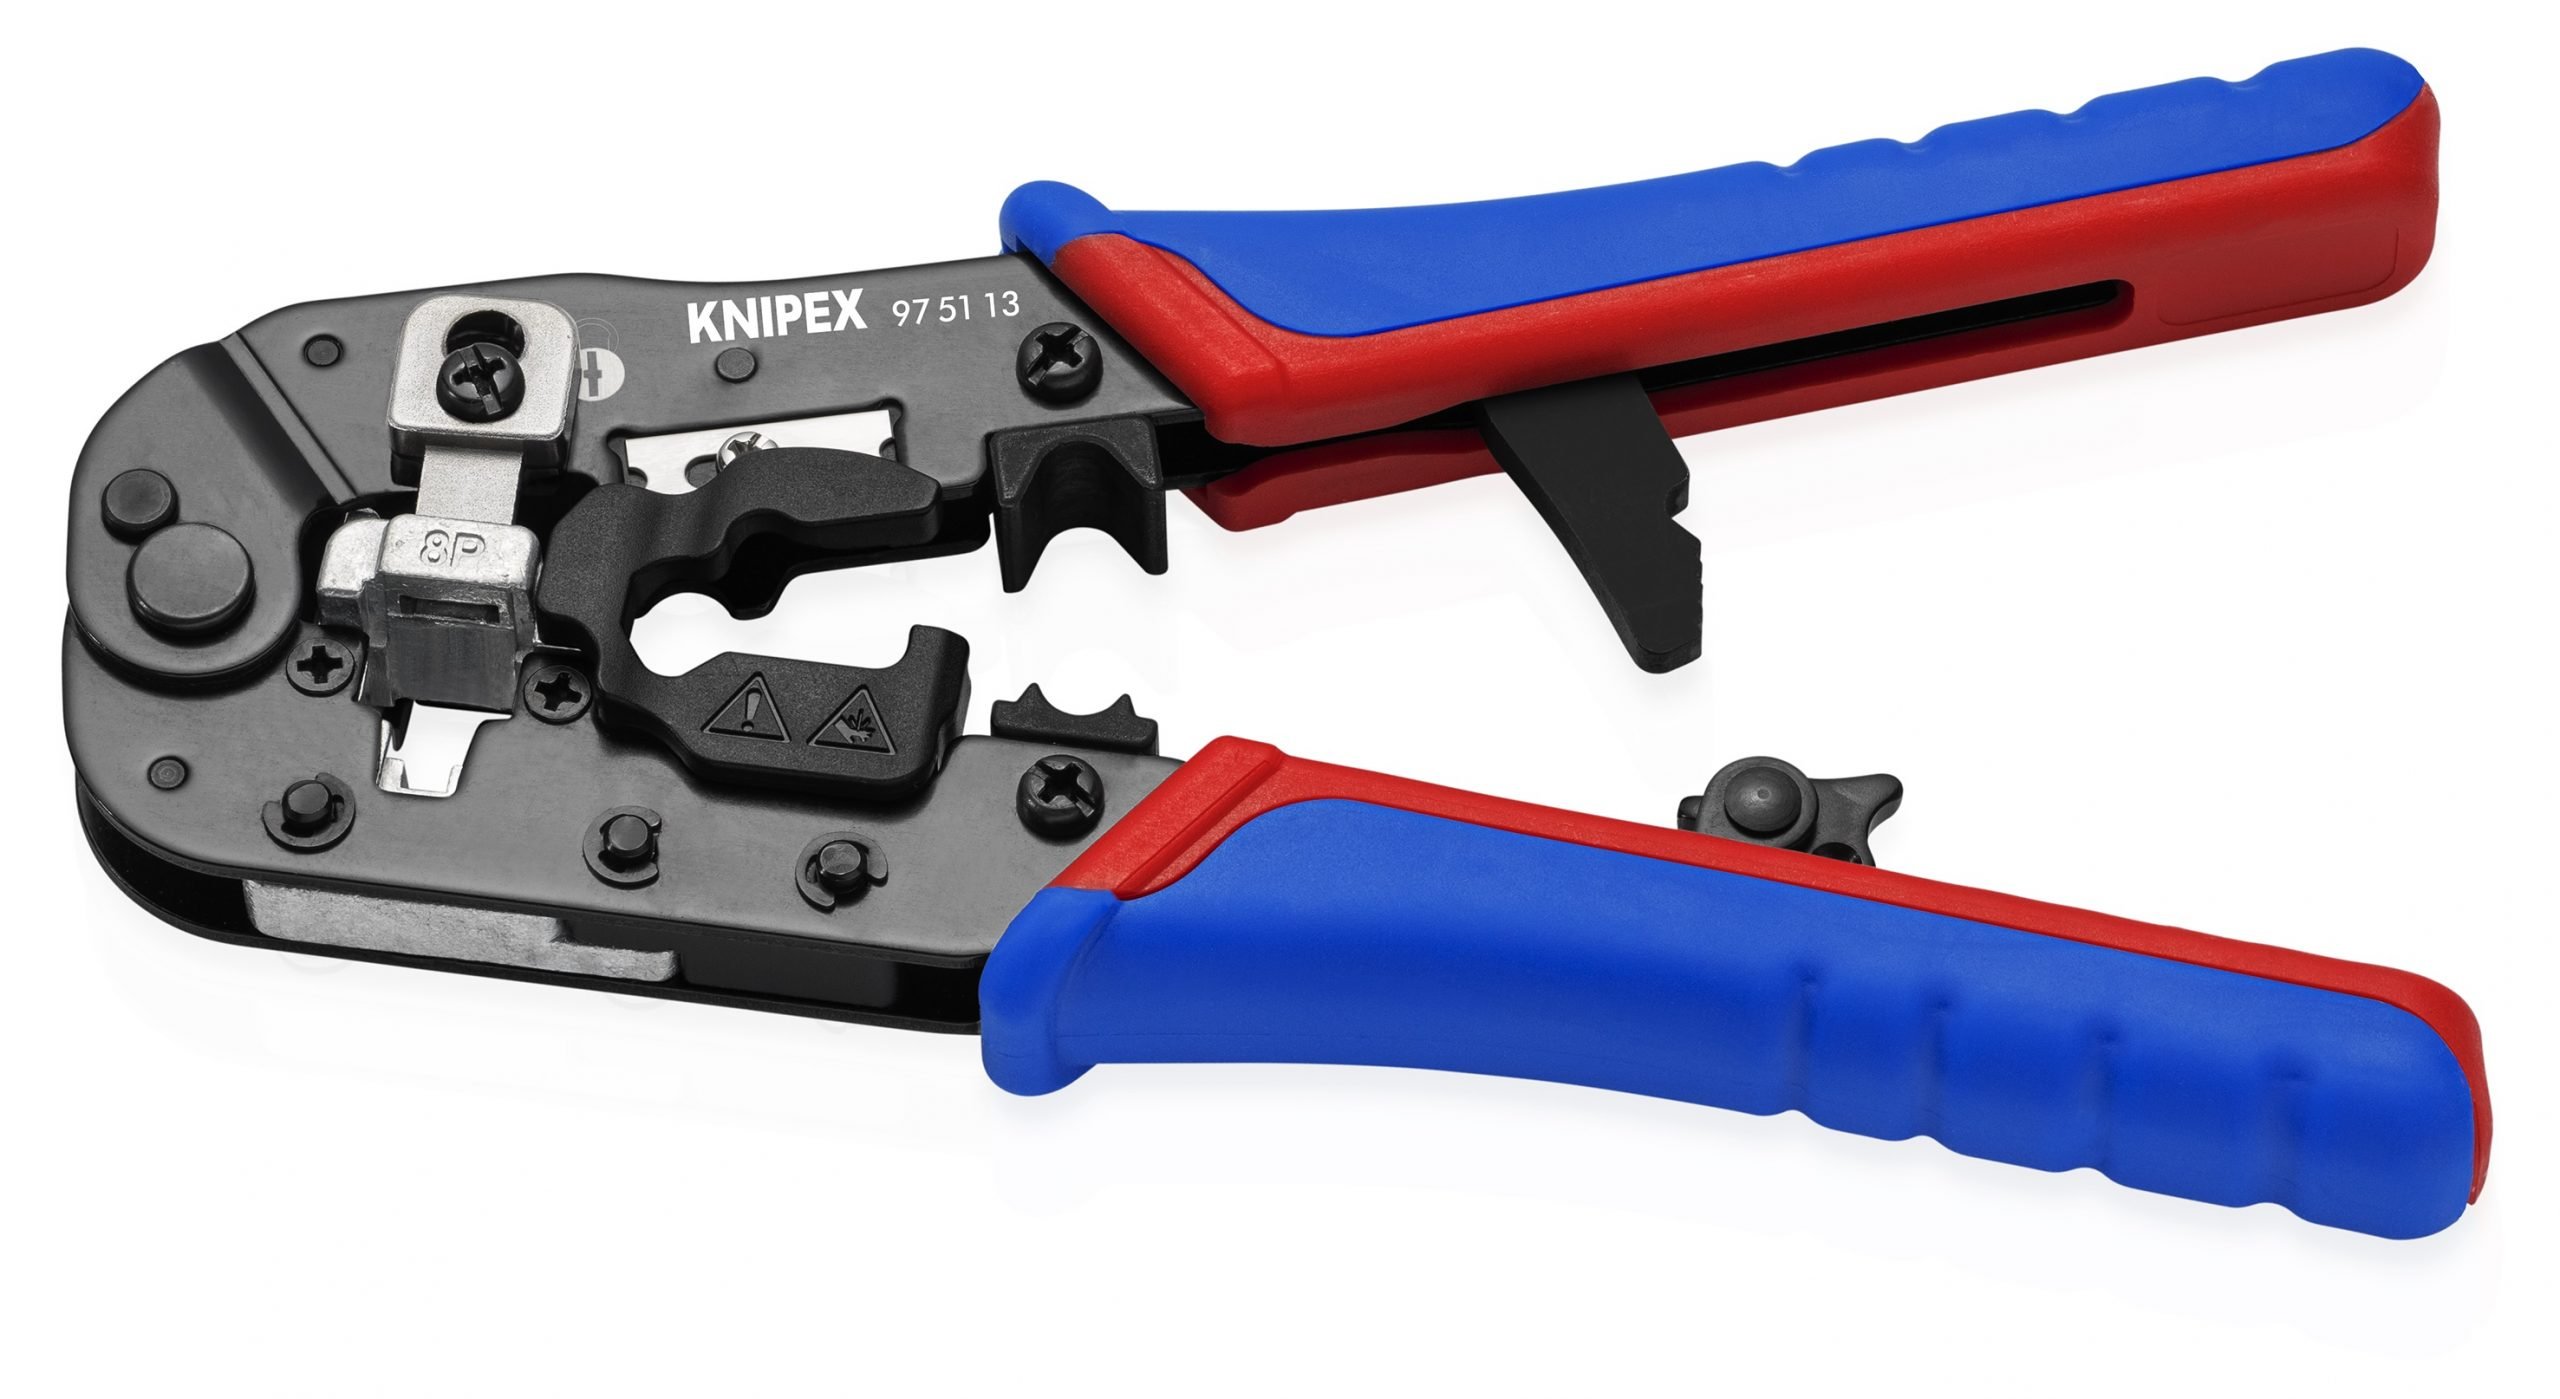 Knipex 97 51 13 Crimping Pliers for RJ45 Western Plugs (All In One